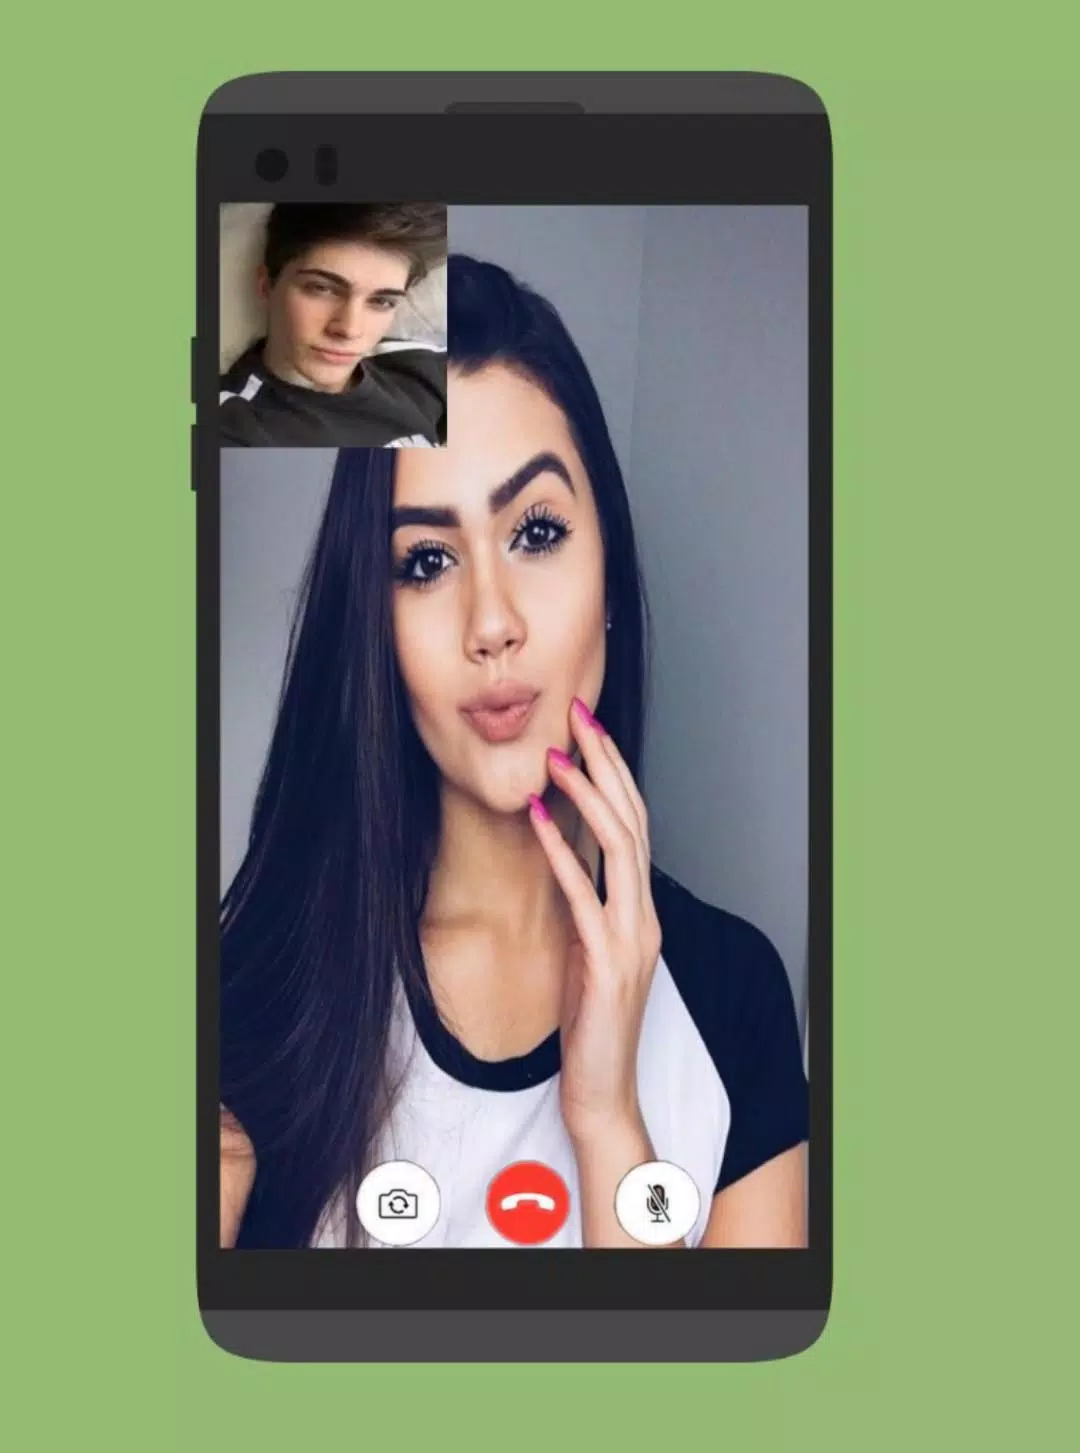 Video chat dating